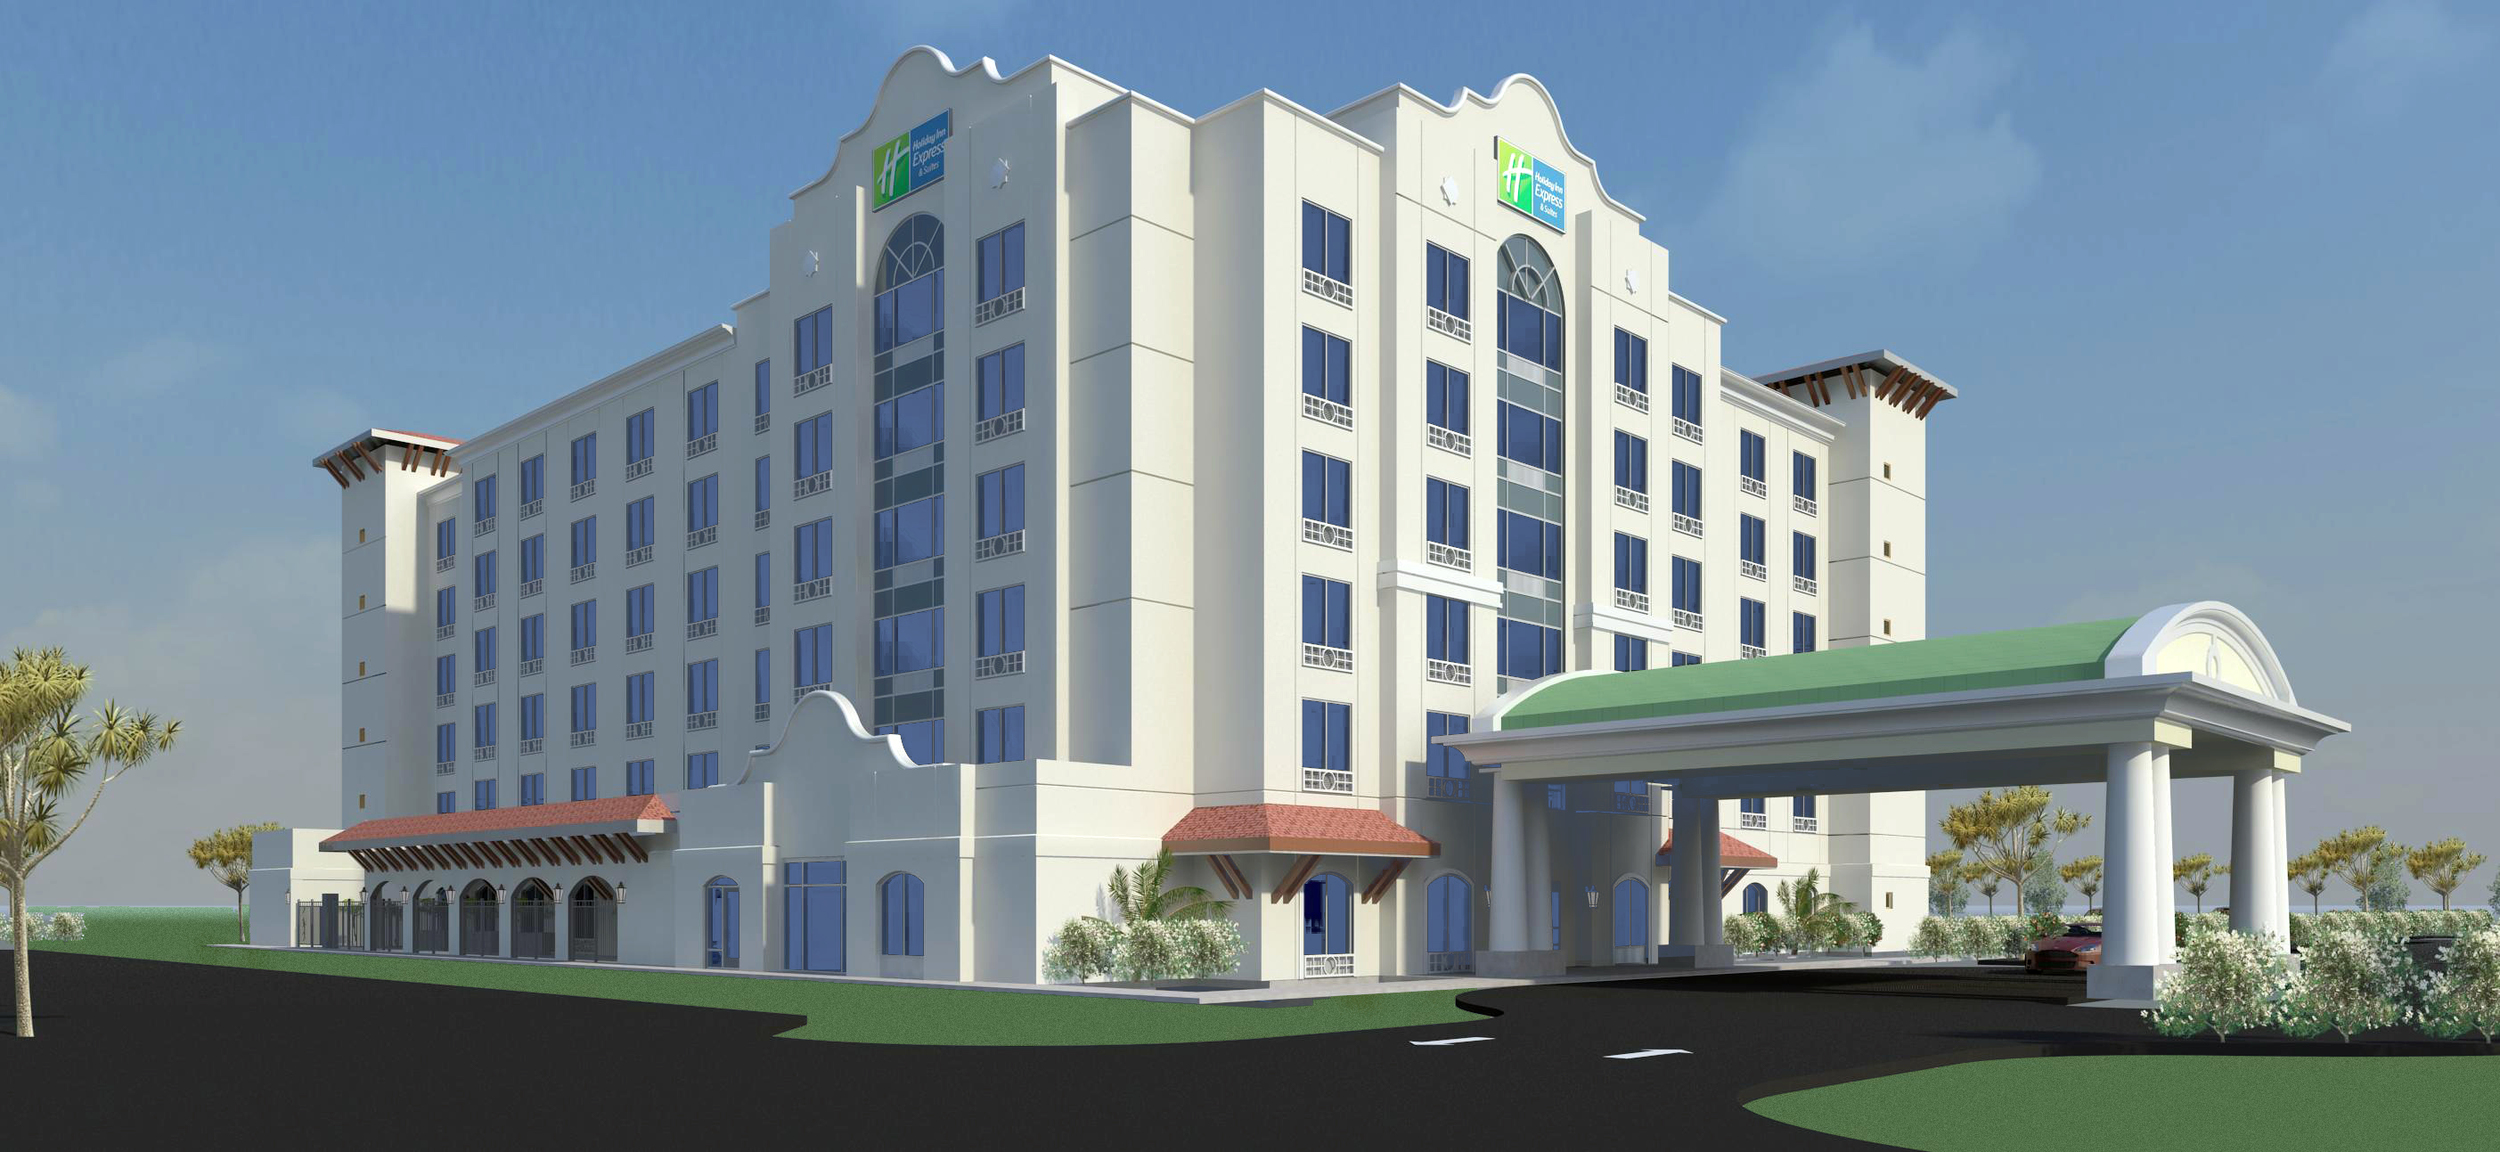 Rendering of Holiday Inn Express &amp; Suites near Aventura (Credit: DLW Architects)